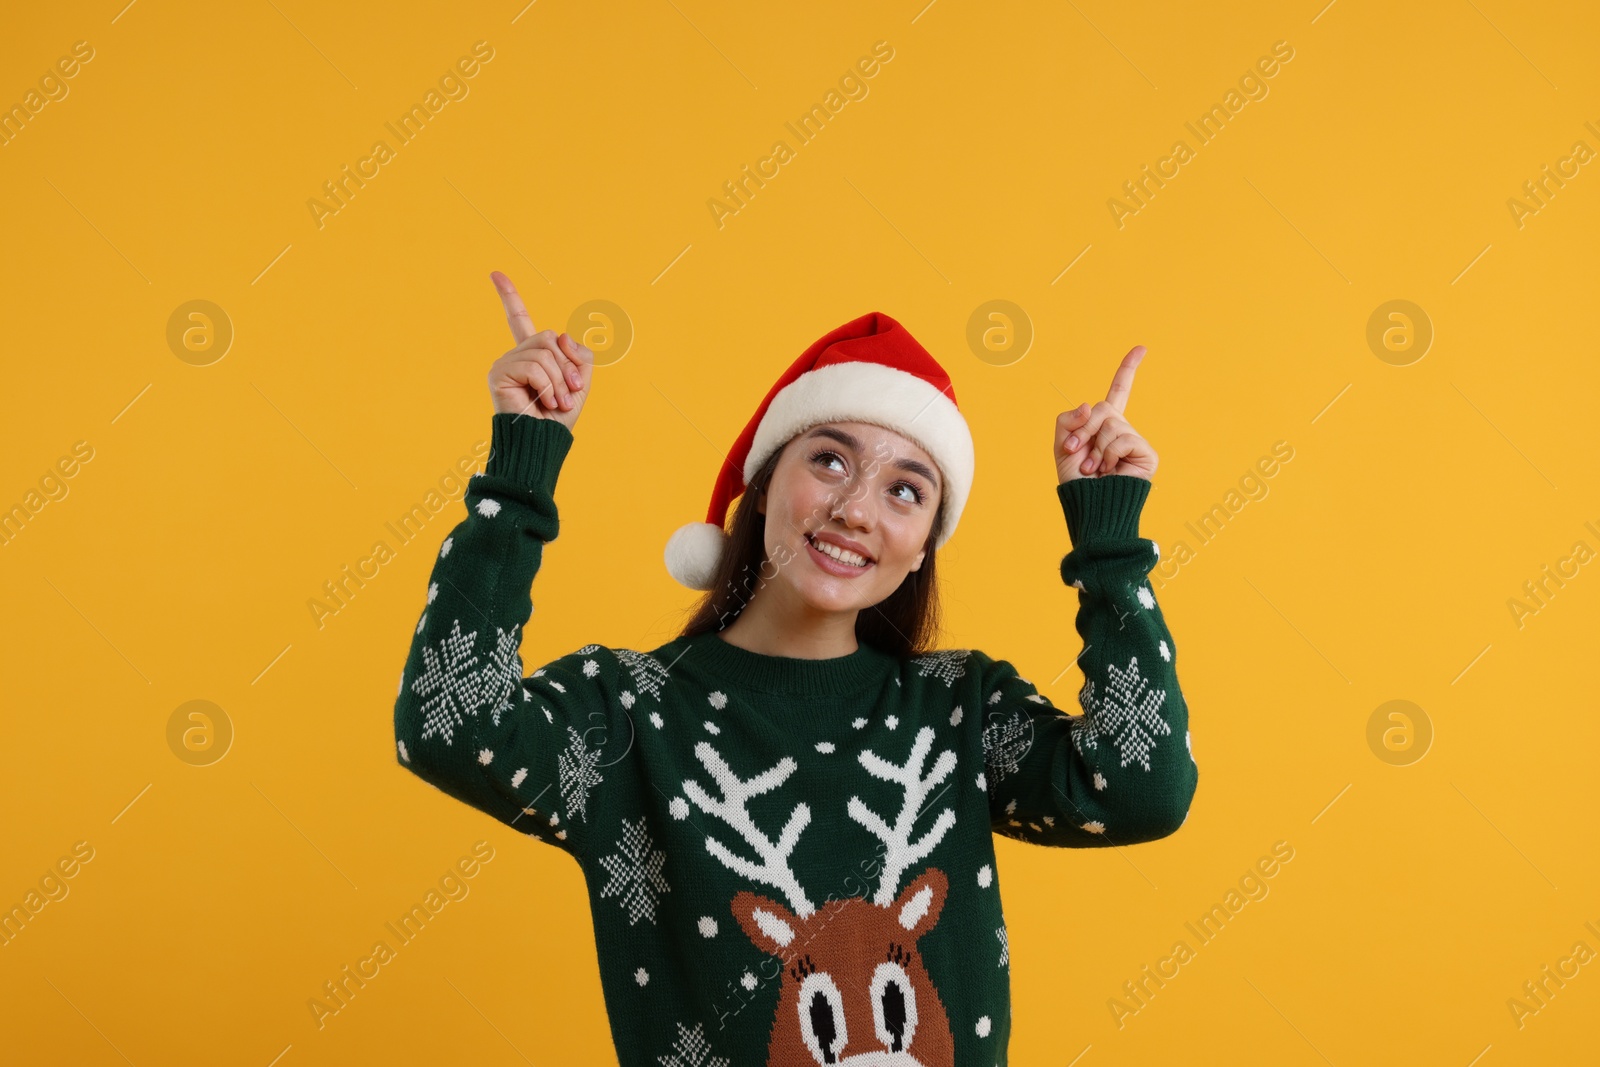 Photo of Happy young woman in Christmas sweater and Santa hat pointing at something on orange background